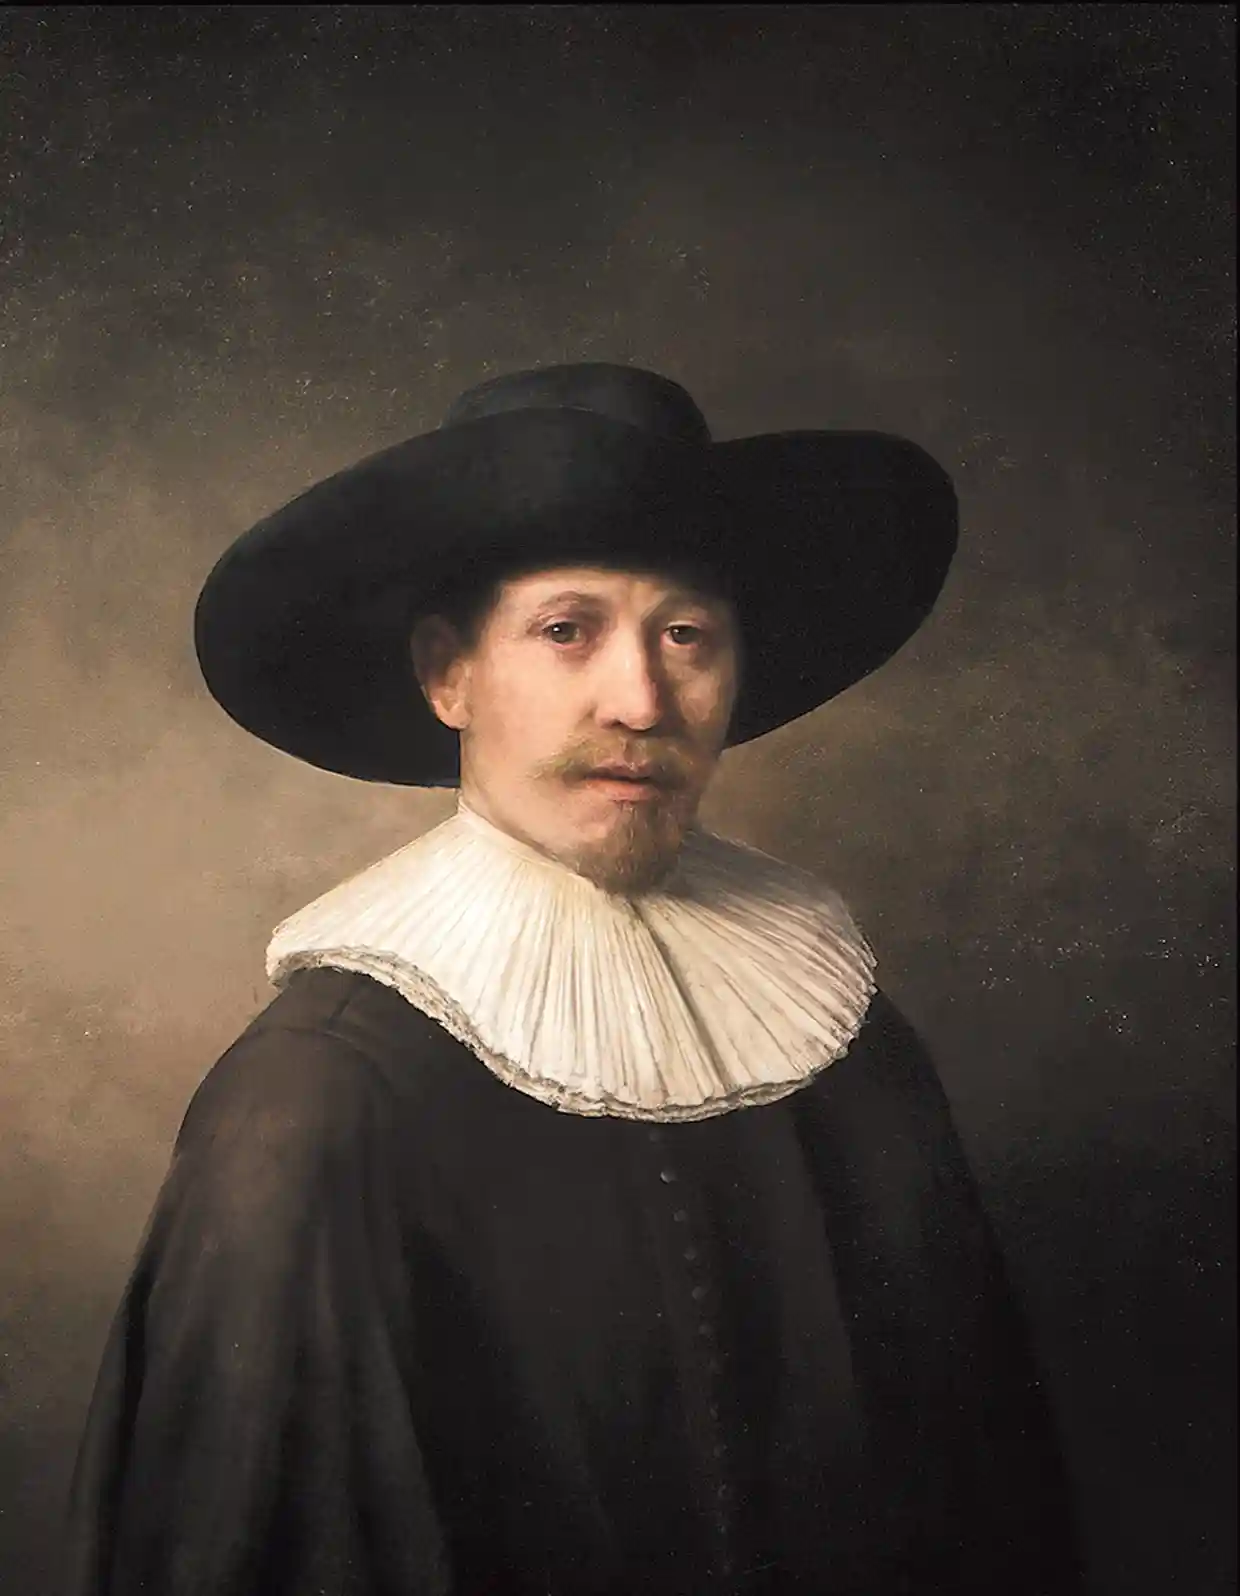 Figure 4. "The Next Rembrandt" is a computer generated 3D painted painting which fed on the real paintings of 17th century Dutch painter Rembrandt. (Source: Guardian)